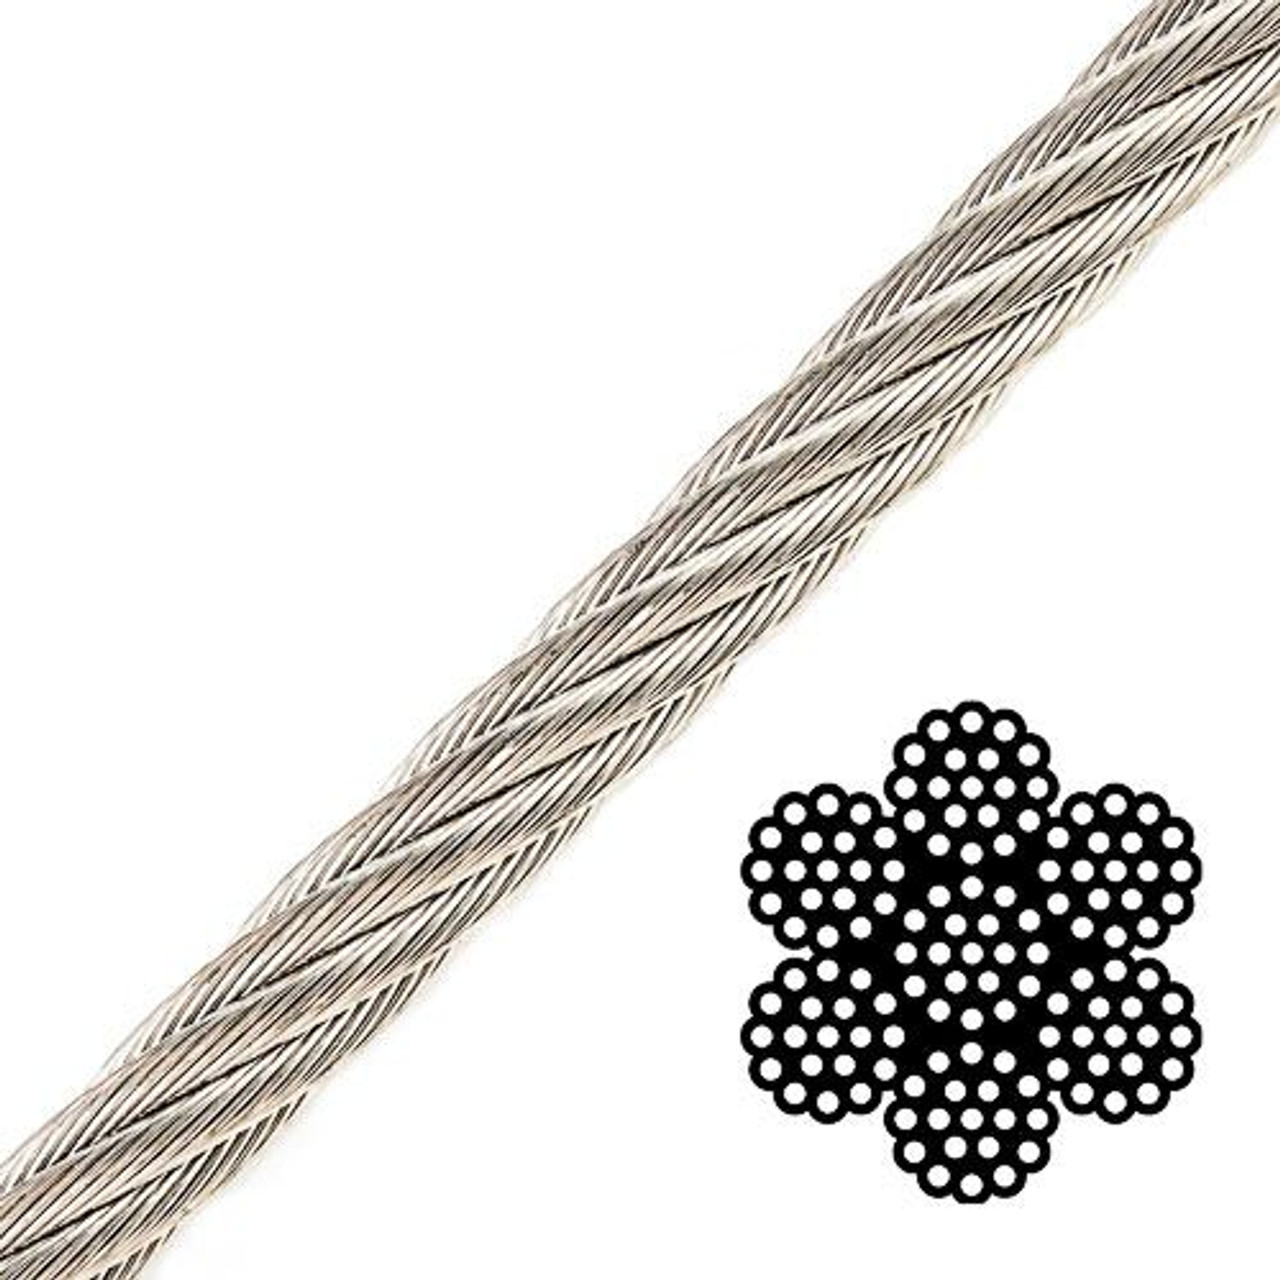 1/4 7x19 Stainless Steel Aircraft Cable - 6400 lbs Breaking Strength